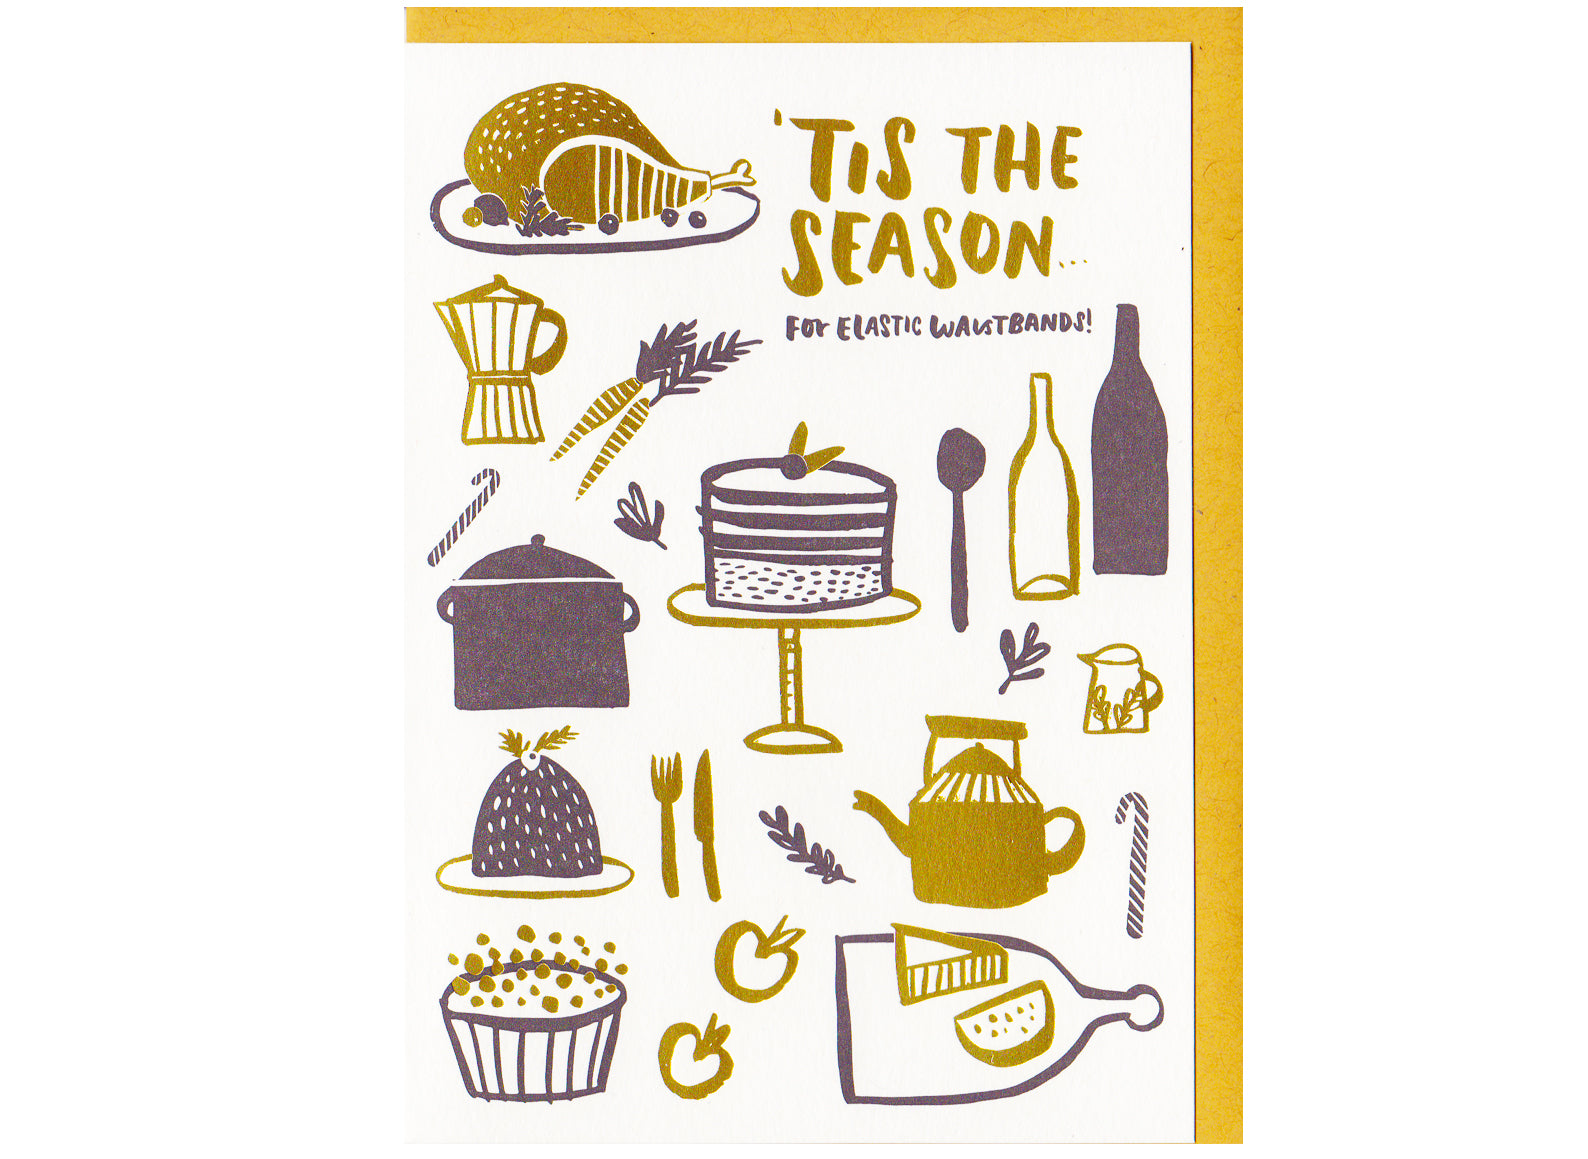 food and wine illustrations text reads 'tis the season for elastic waistbands!